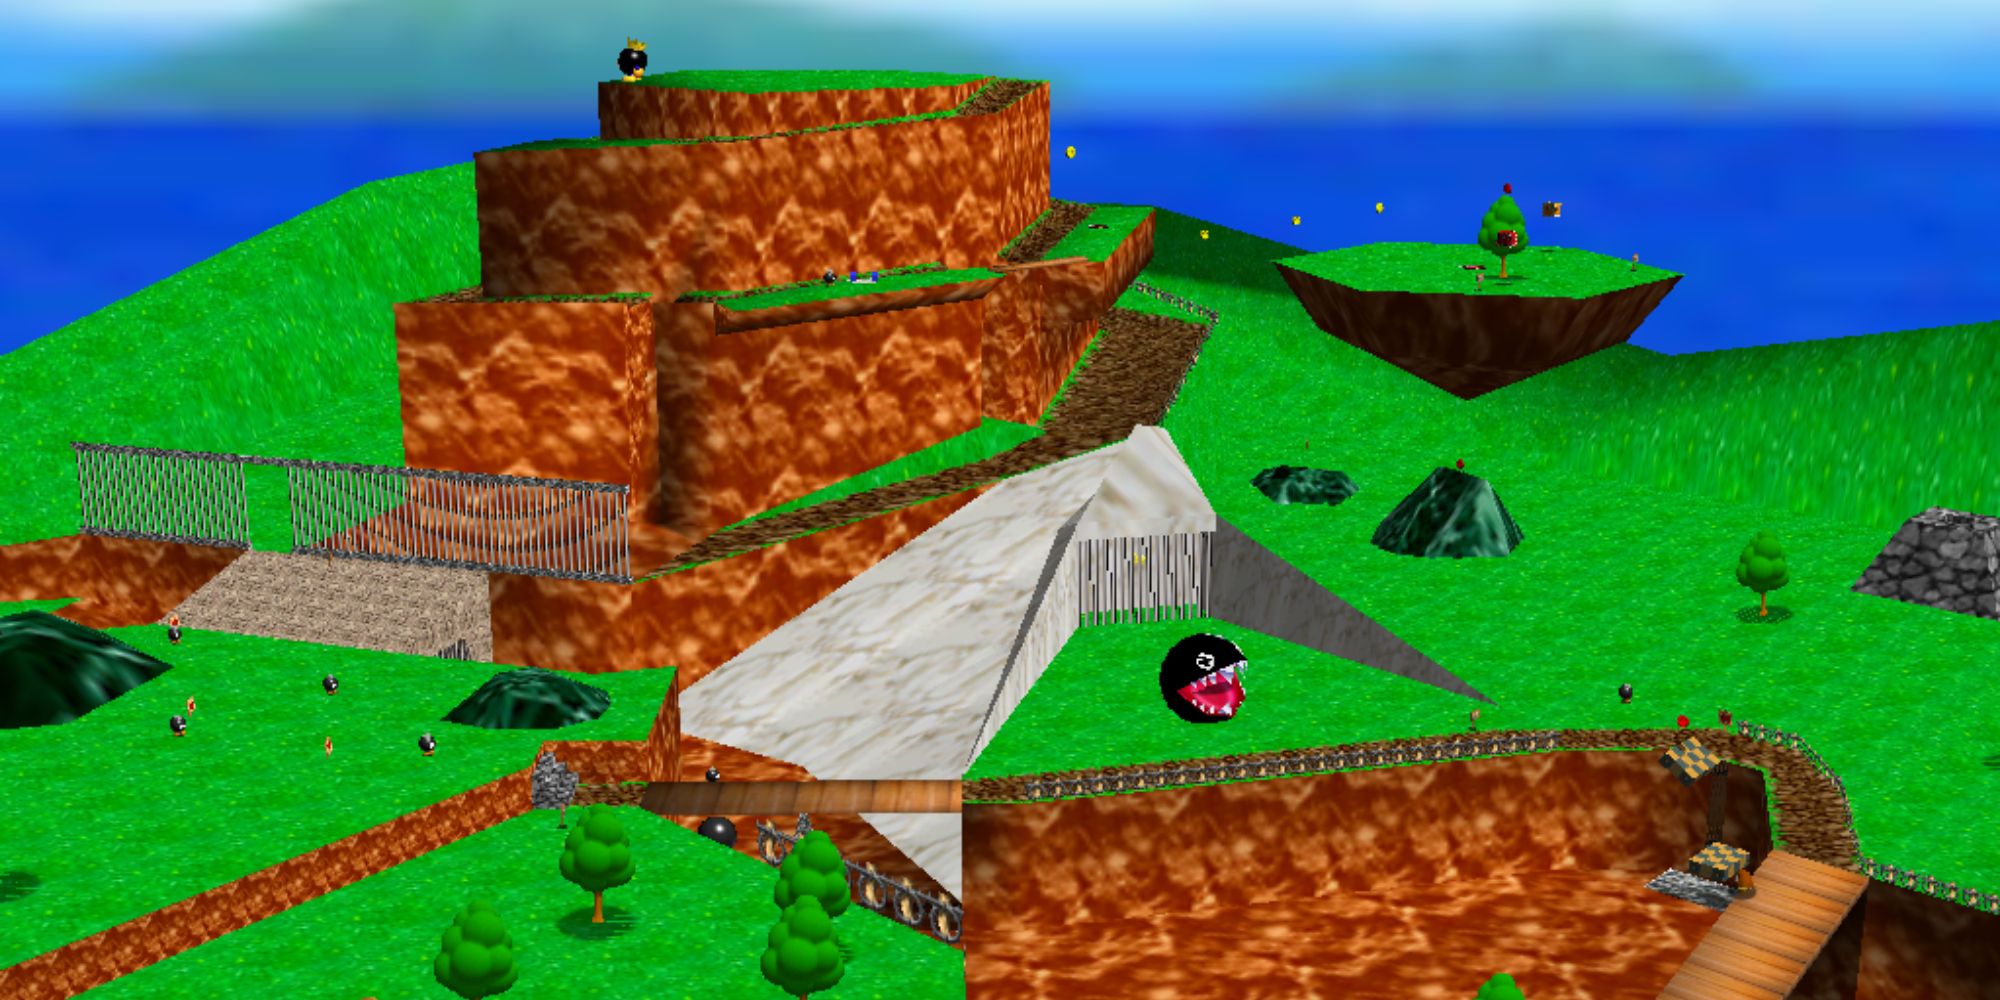 An overview of Bob-Omb Battlefield in Mario 64